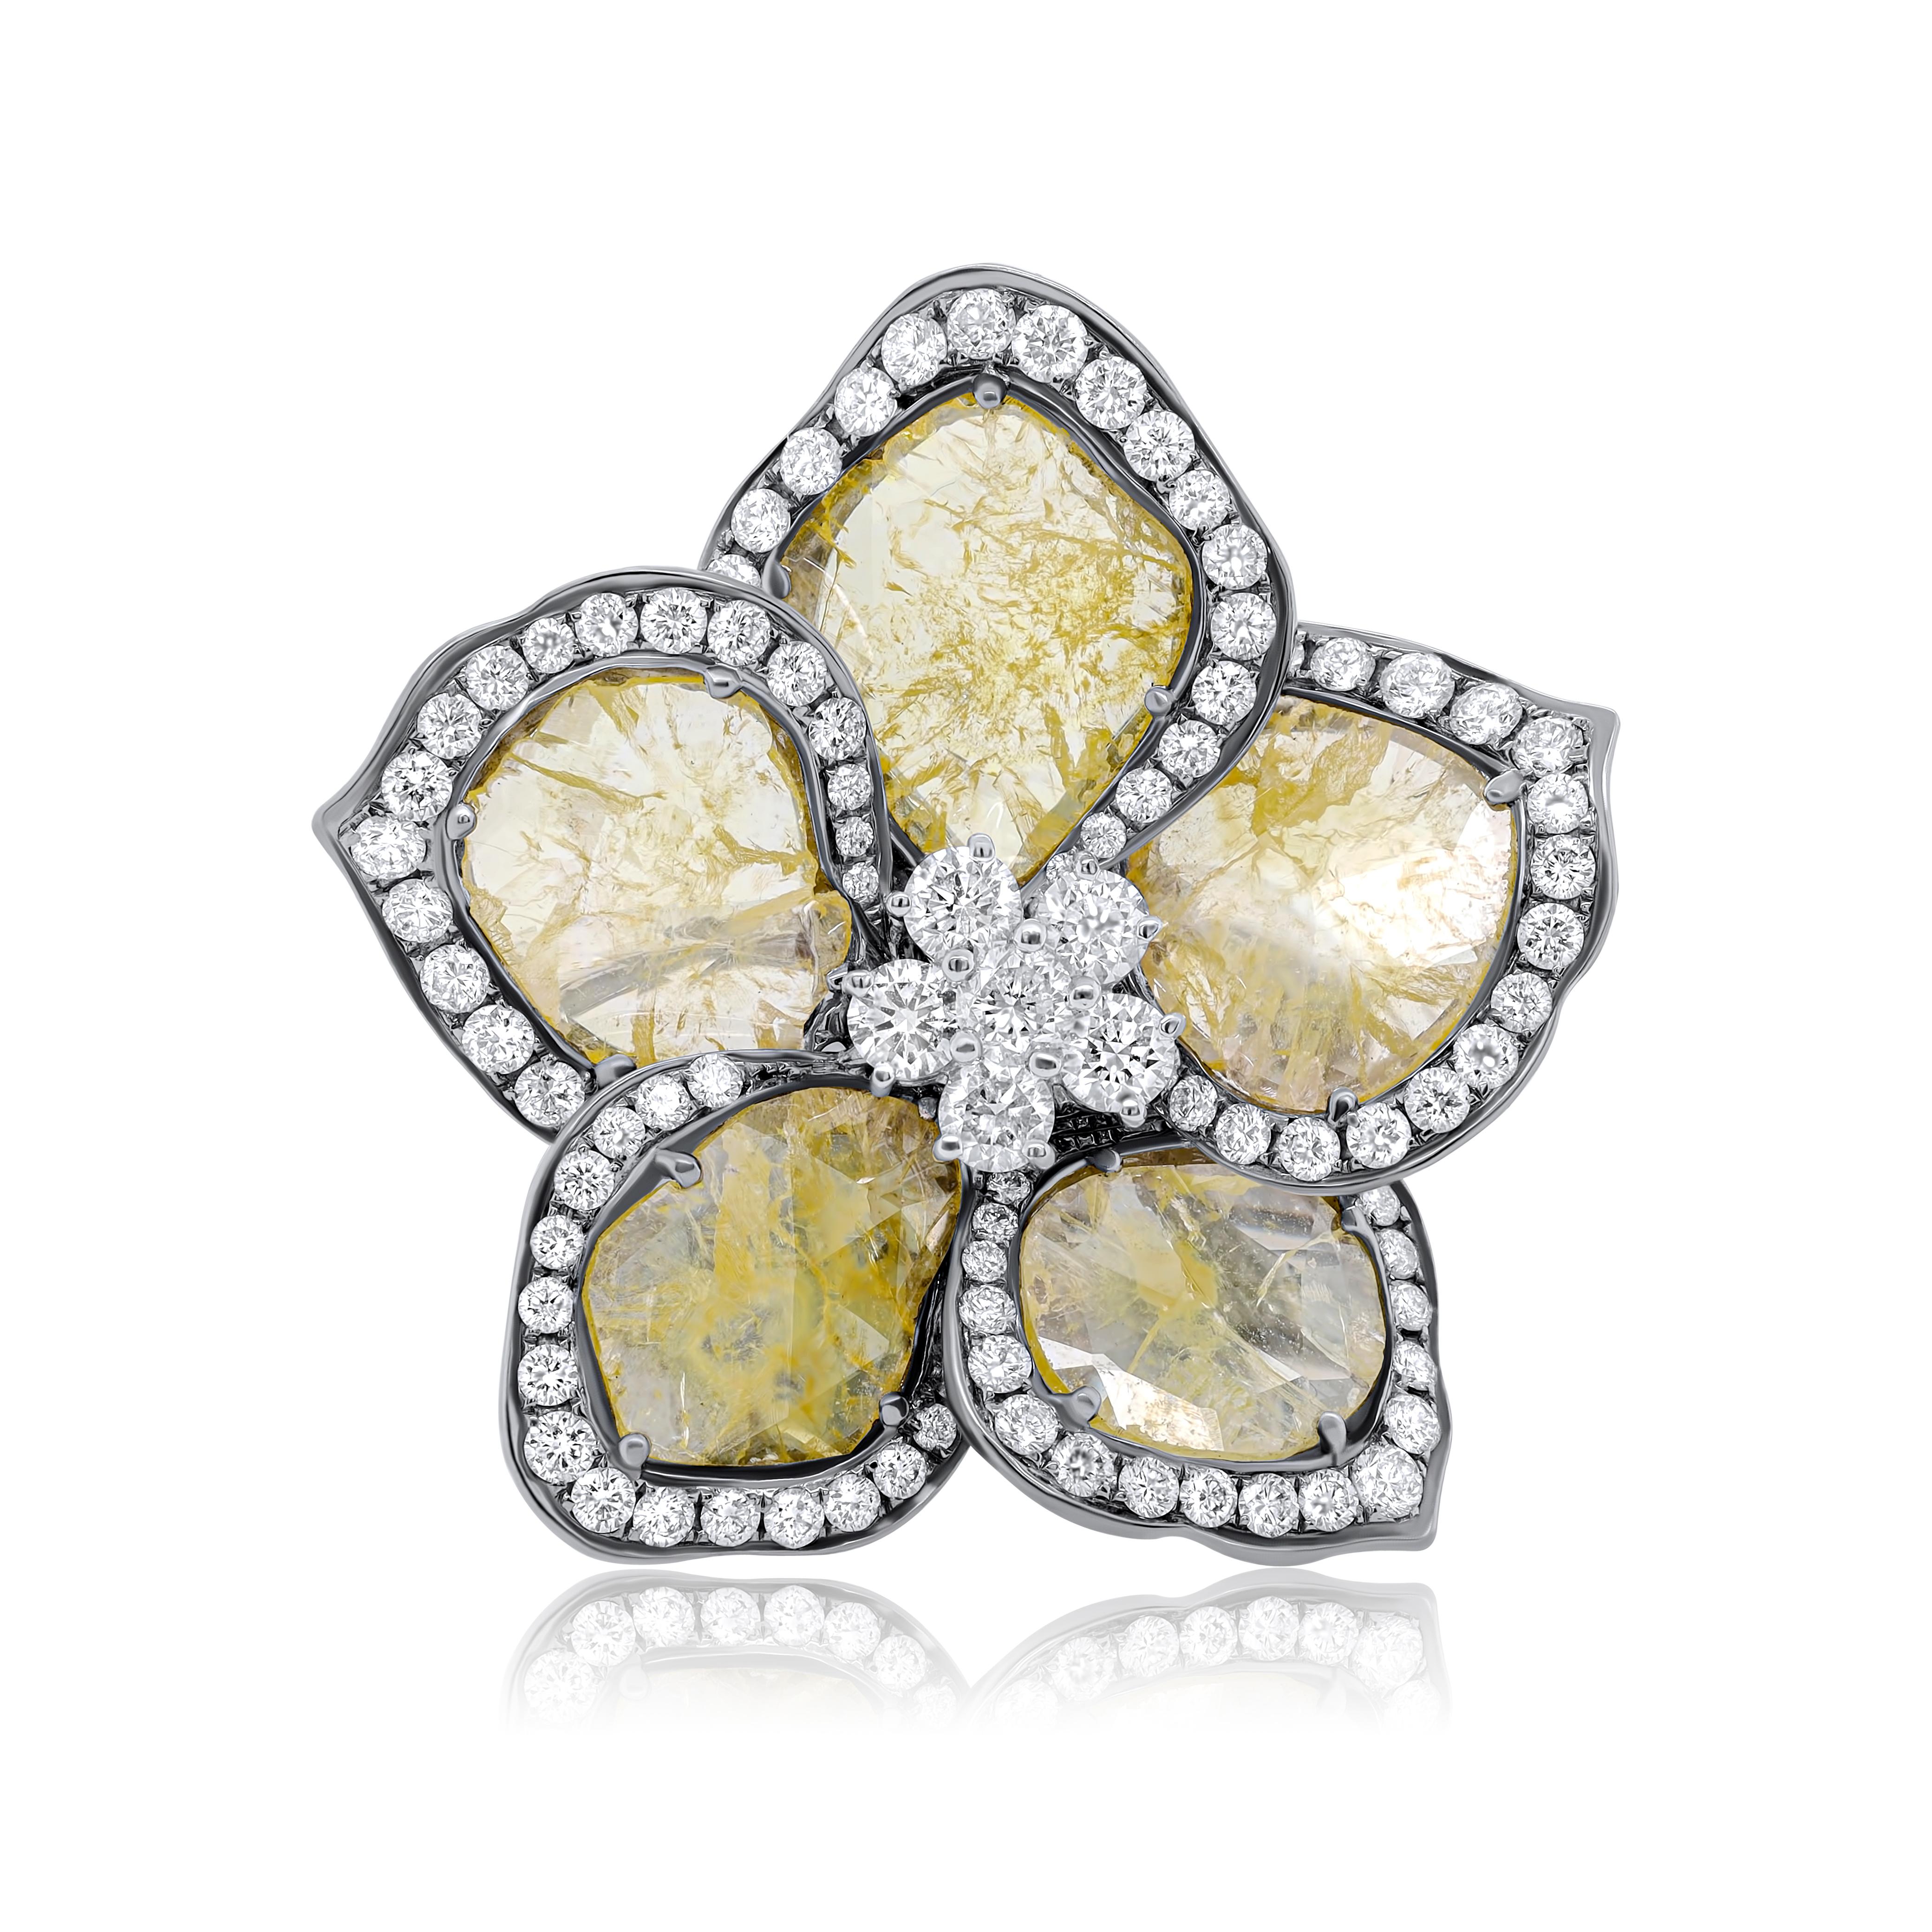 18 kt white gold diamond ring featuring a flower design created by 6.53 cts tw of yellow and white rough cut sliced diamonds
Diana M. is a leading supplier of top-quality fine jewelry for over 35 years.
Diana M is one-stop shop for all your jewelry